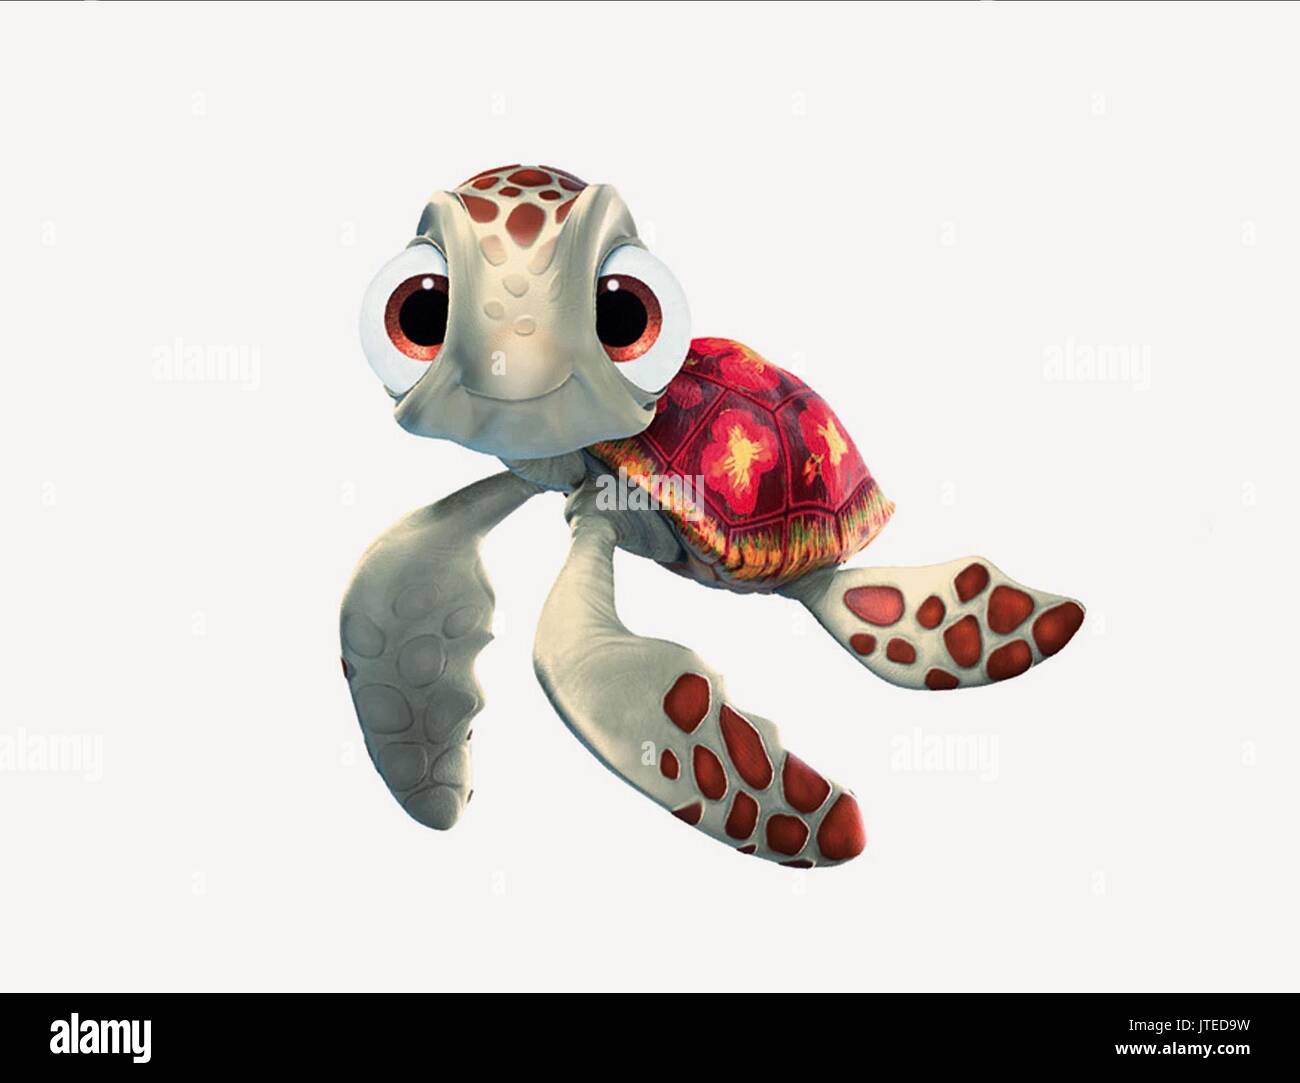 Pictures Of Squirt From Finding Nemo Squirting